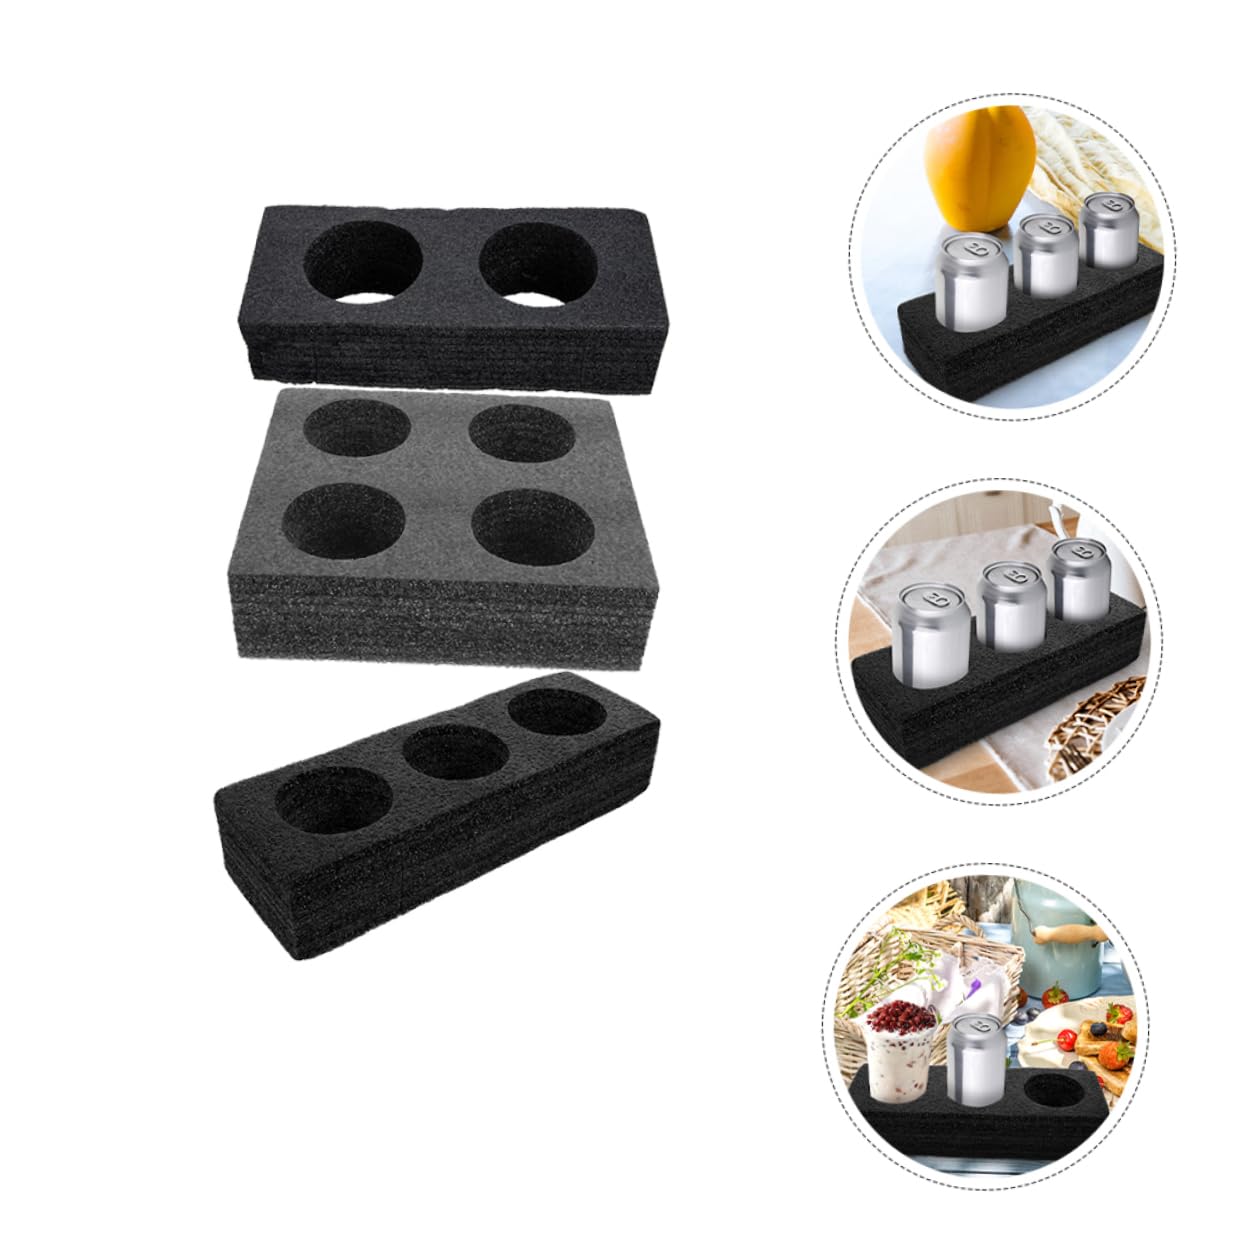 3 Pcs Drink Cup Holder Coffee Cup Holder Coffee Tray Mugs Coffee Mugs Drinks Carrier Cup Carrier Tray Foam Coffee Cup Holder Pearl Cotton Porous Black Cups and re-usable